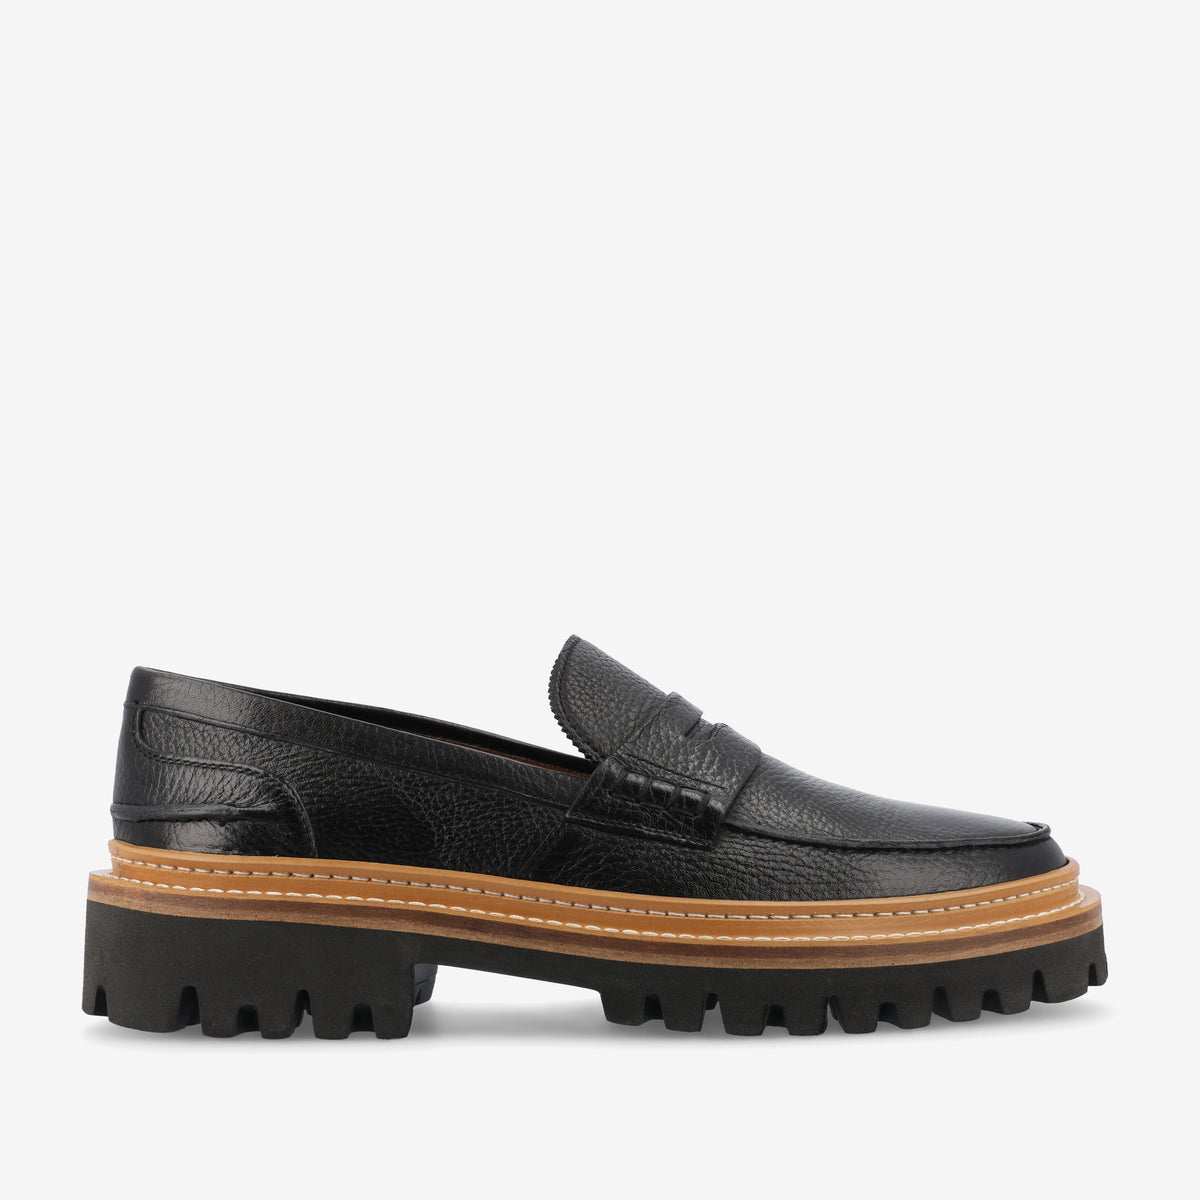 The Country Loafer in Black (Last Chance, Final Sale)